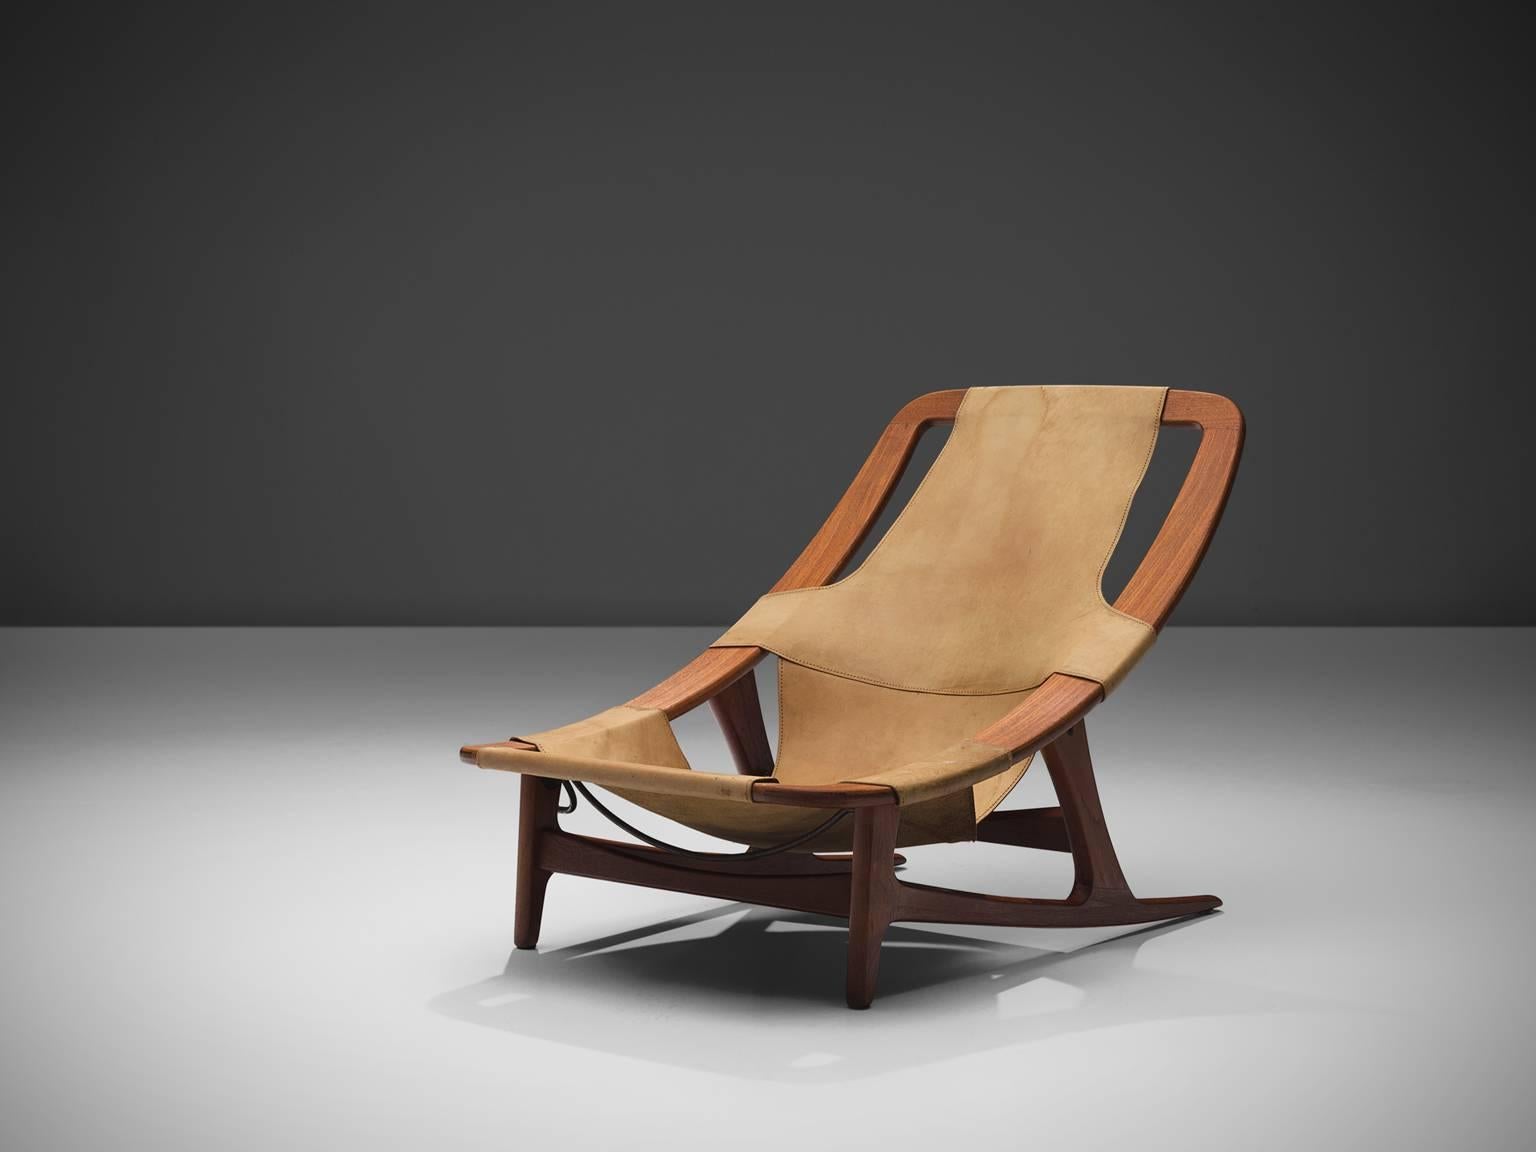 Arne F. Tidemand Ruud for Norcraft, lounge chair 'Holmenkollen,' teak and cognac leather, Norway, 1959. 

This easy chair is designed by Norwegian designer Arne F. Tidemand Ruud. This chair is very dynamic due it's design and shapes. The bended